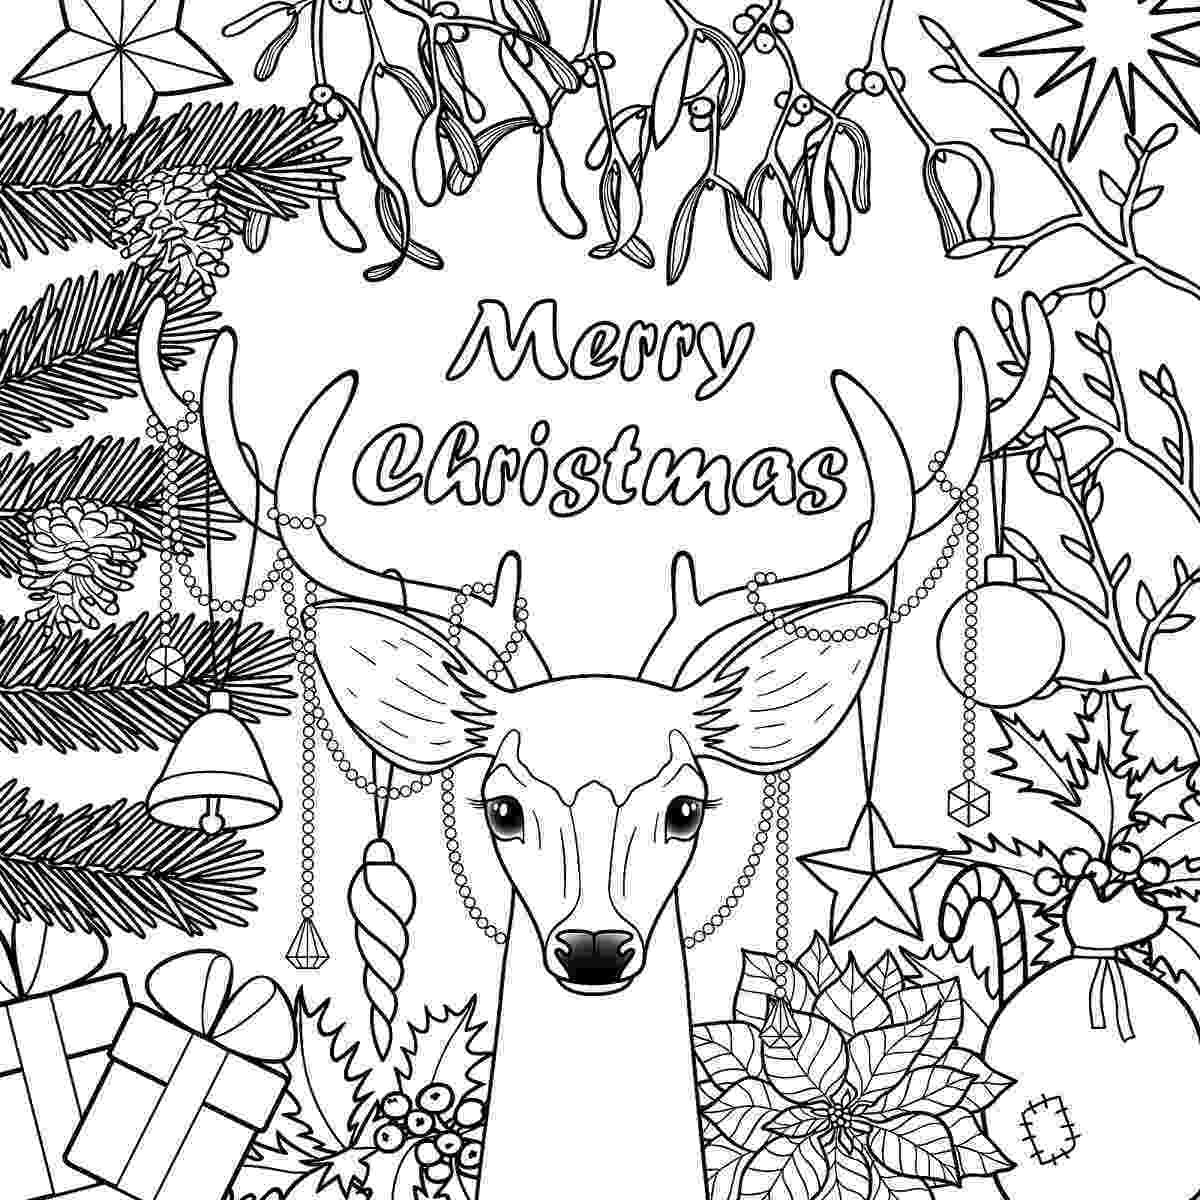 xmas colouring pages for adults xmas colouring pages for adults xmas colouring pages for adults 